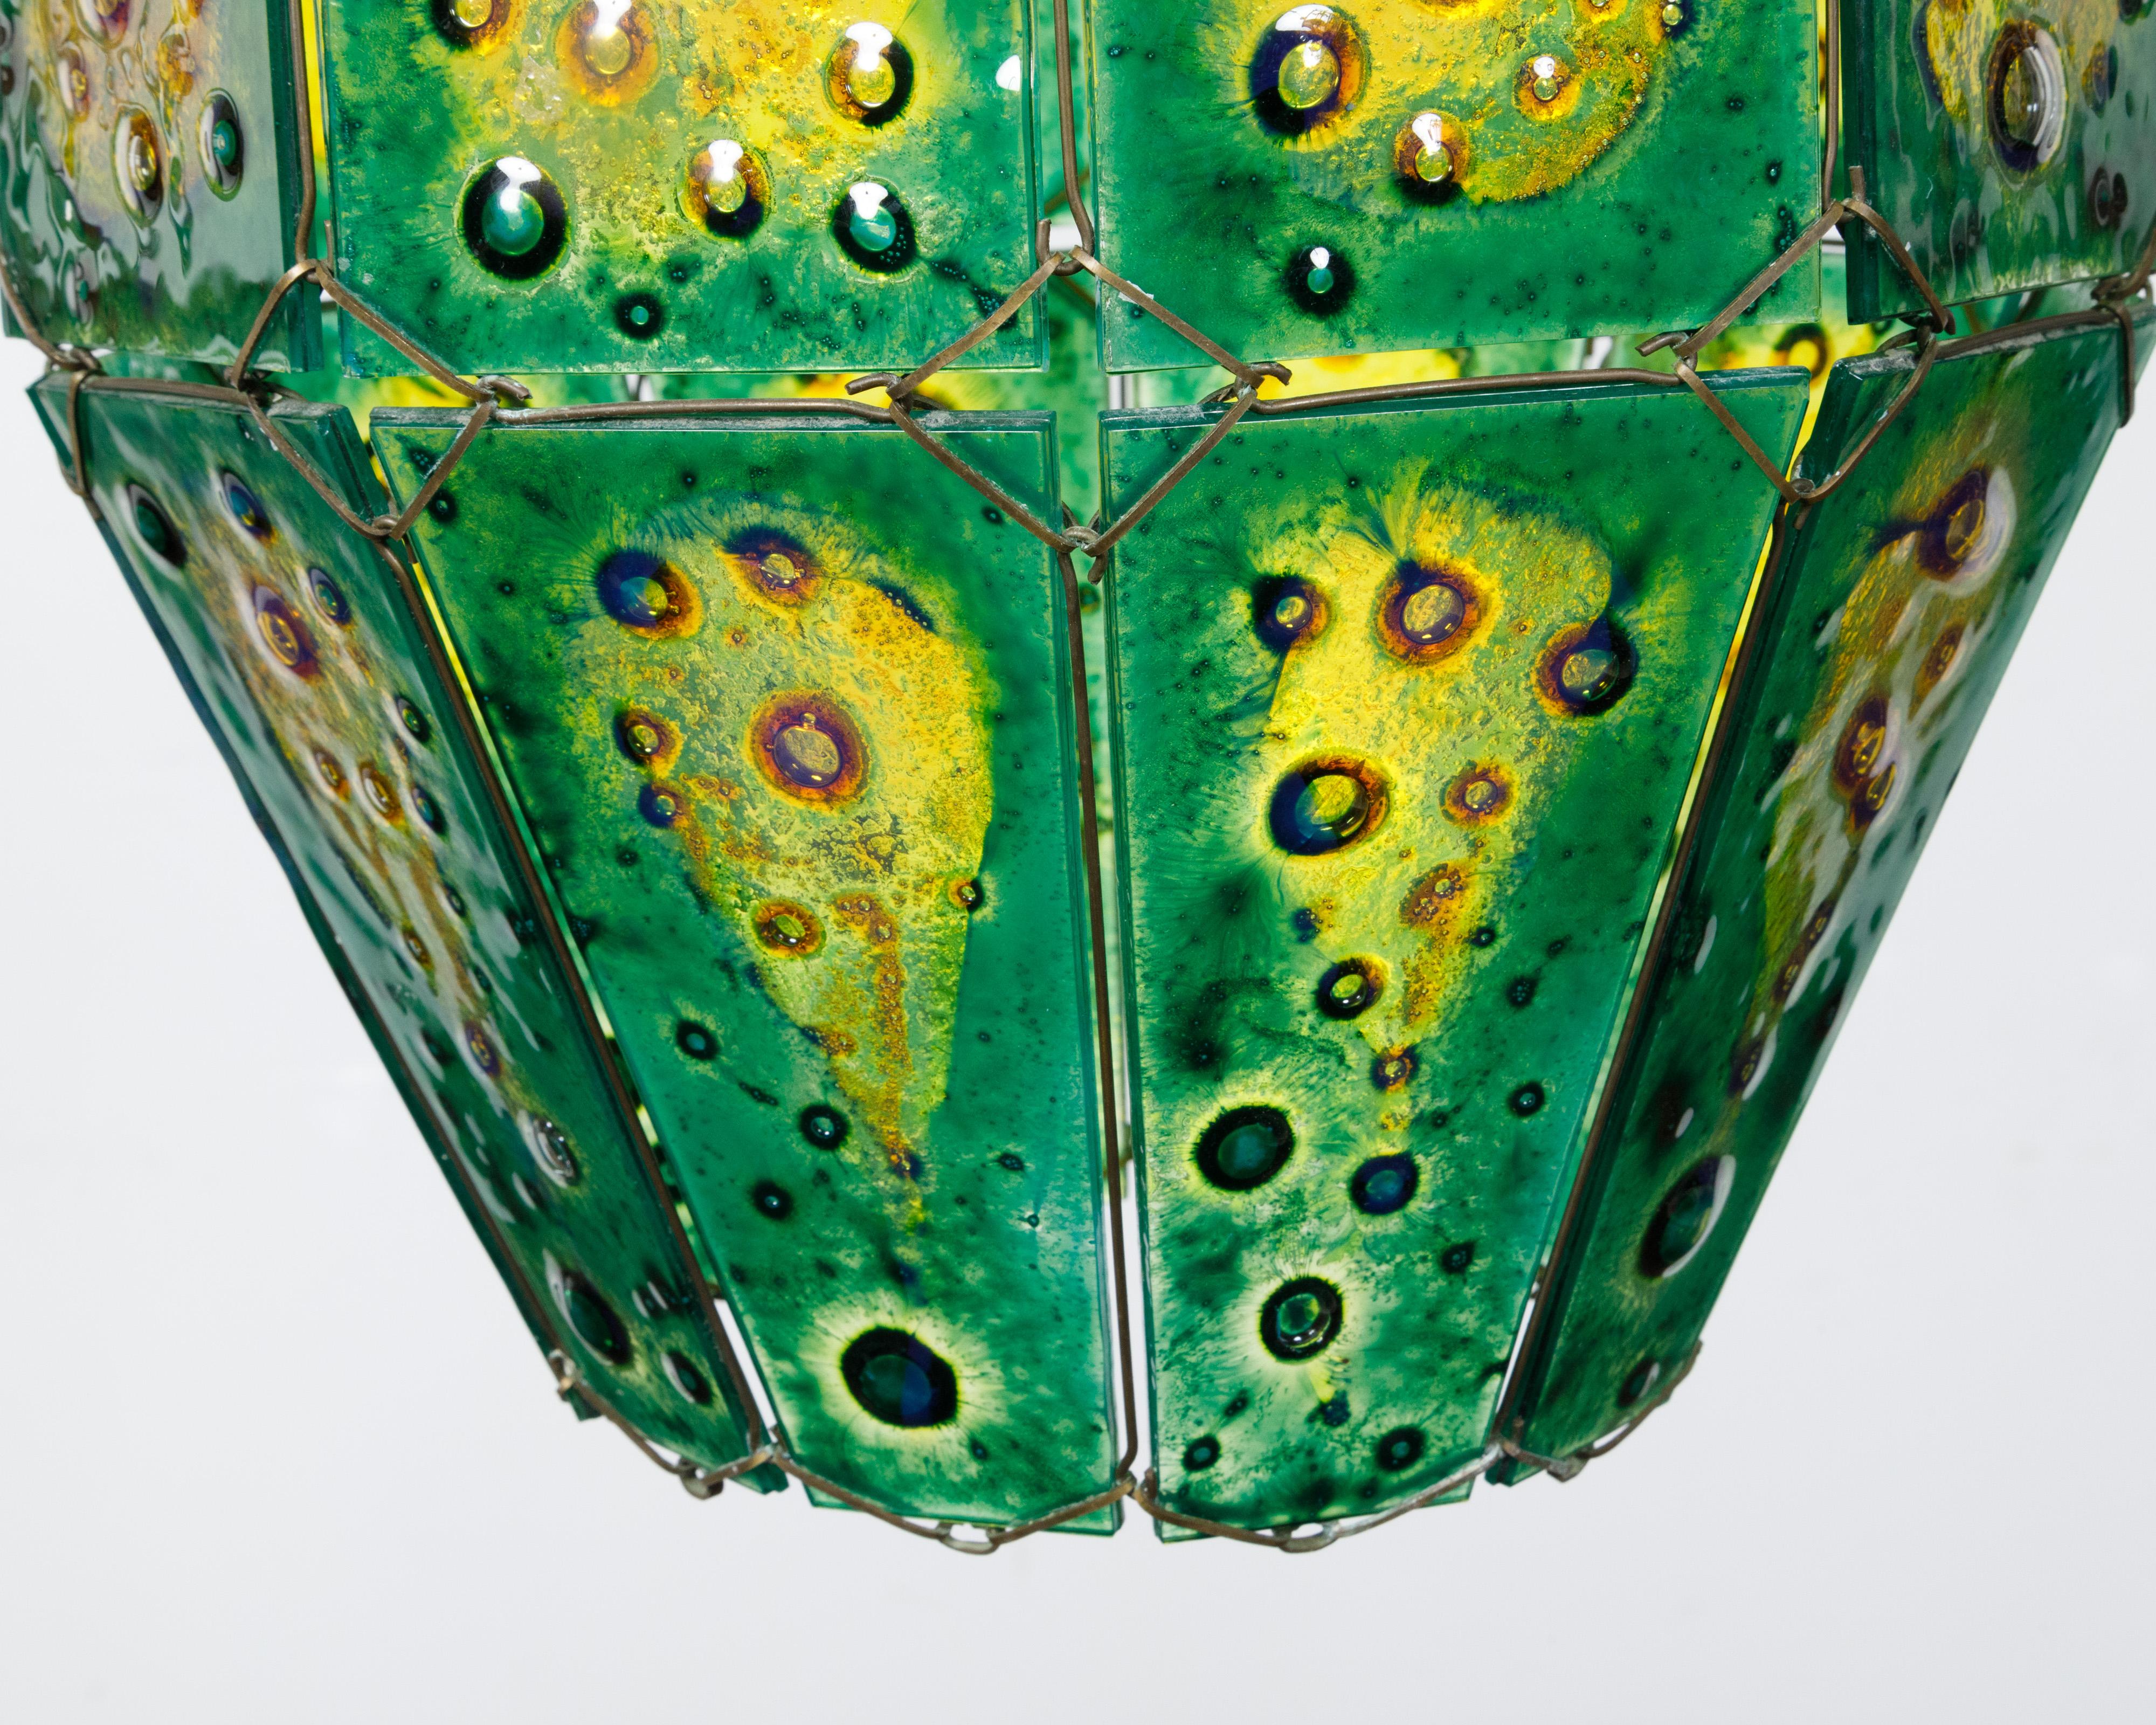 20th Century Felipe Derflingher Art Glass Pendant Light Fixture with Green and Yellow Tones For Sale